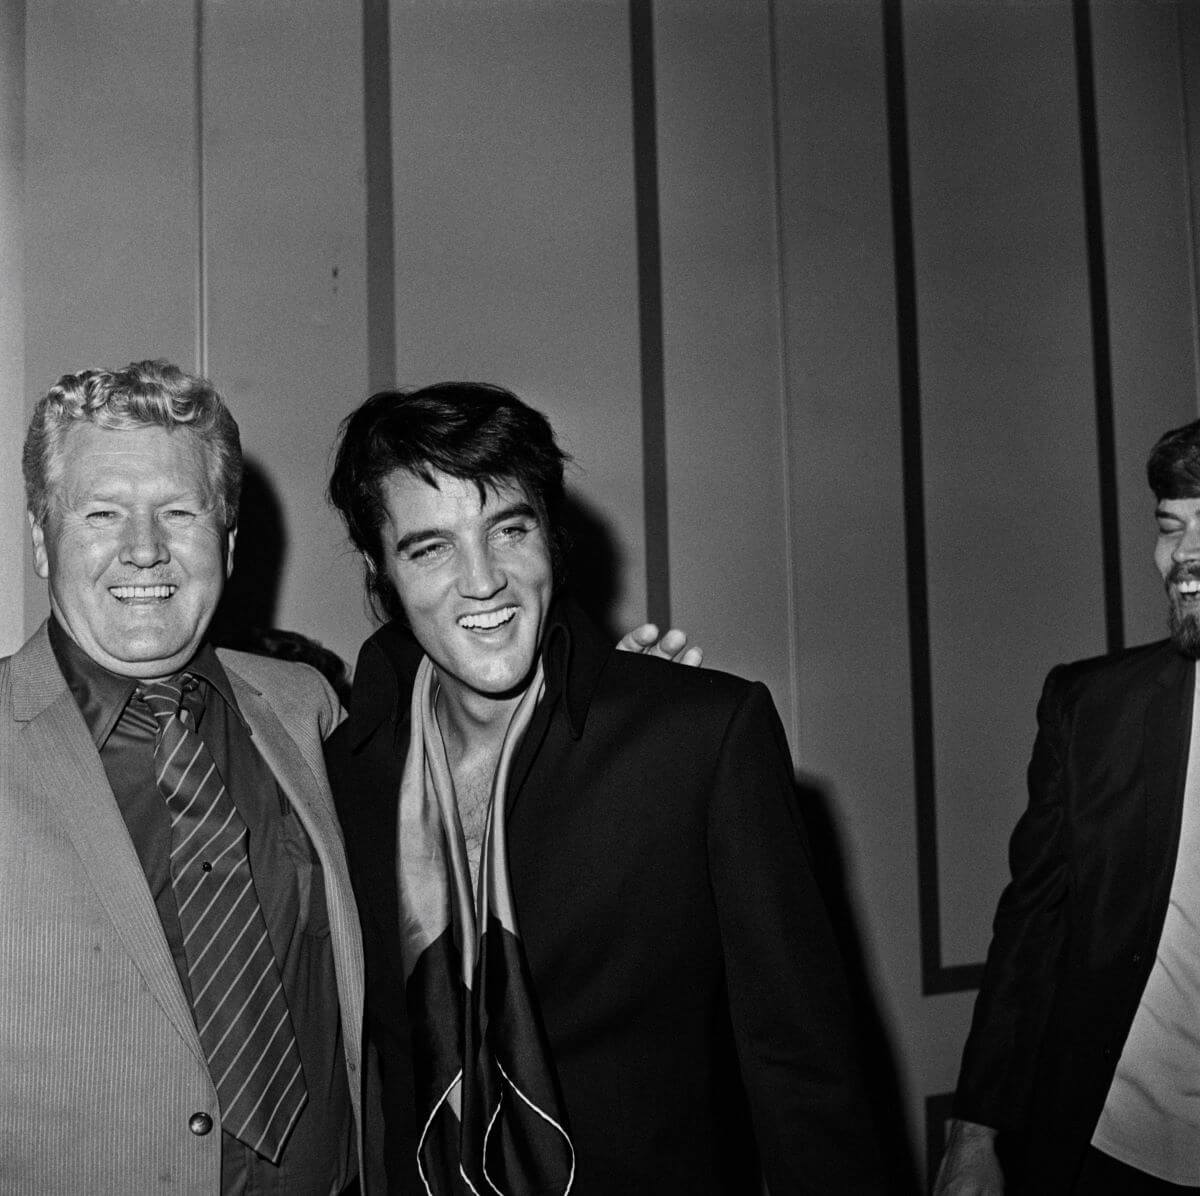 A black and white picture of Elvis Presley standing with his father, Vernon Presley. They both smile.